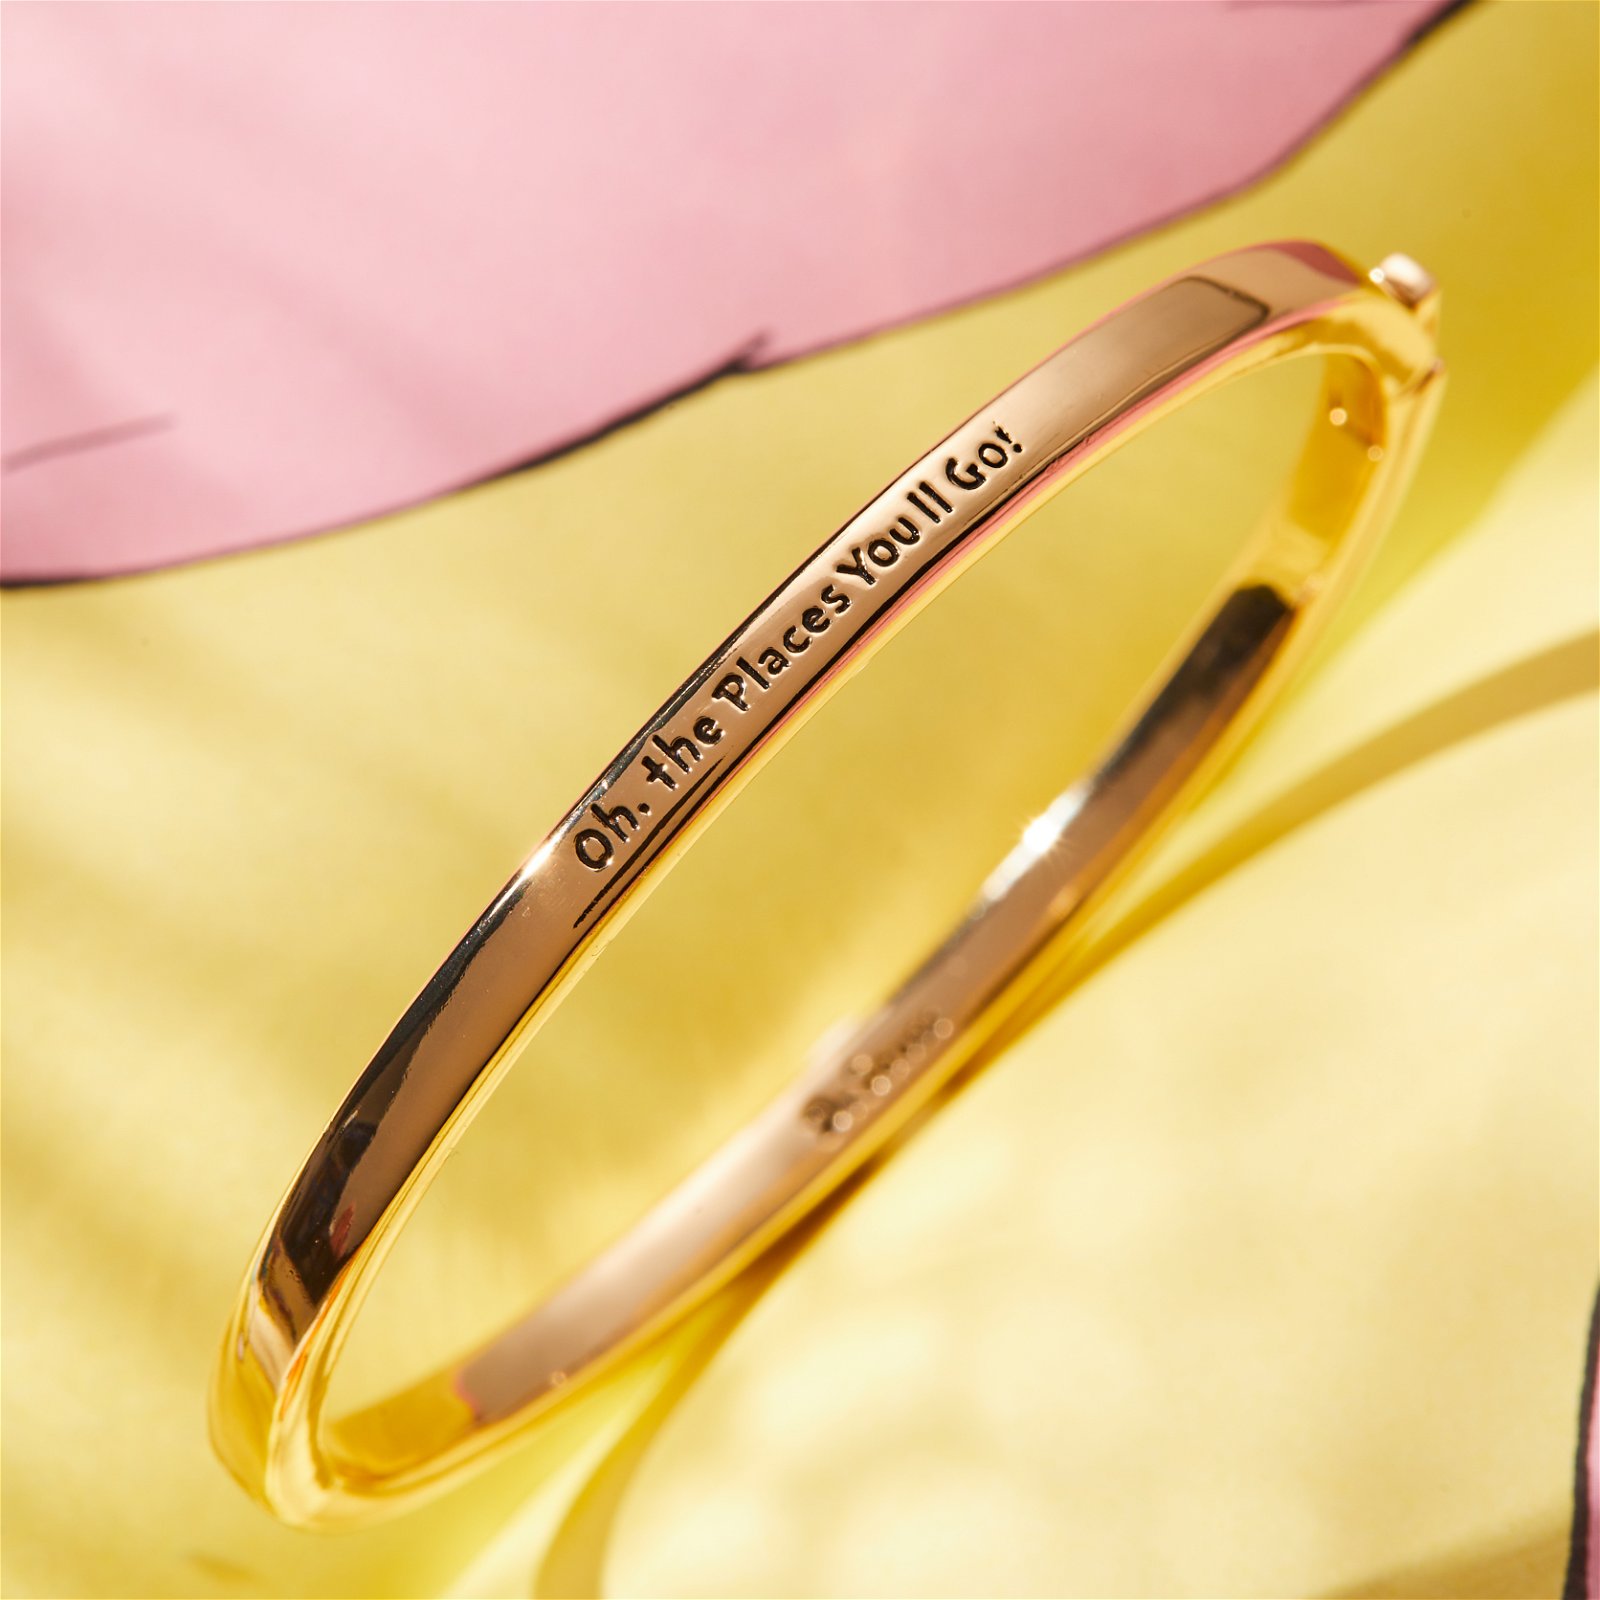 Dr. Seuss™ 'Oh The Places You'll Go' Hinge Bangle